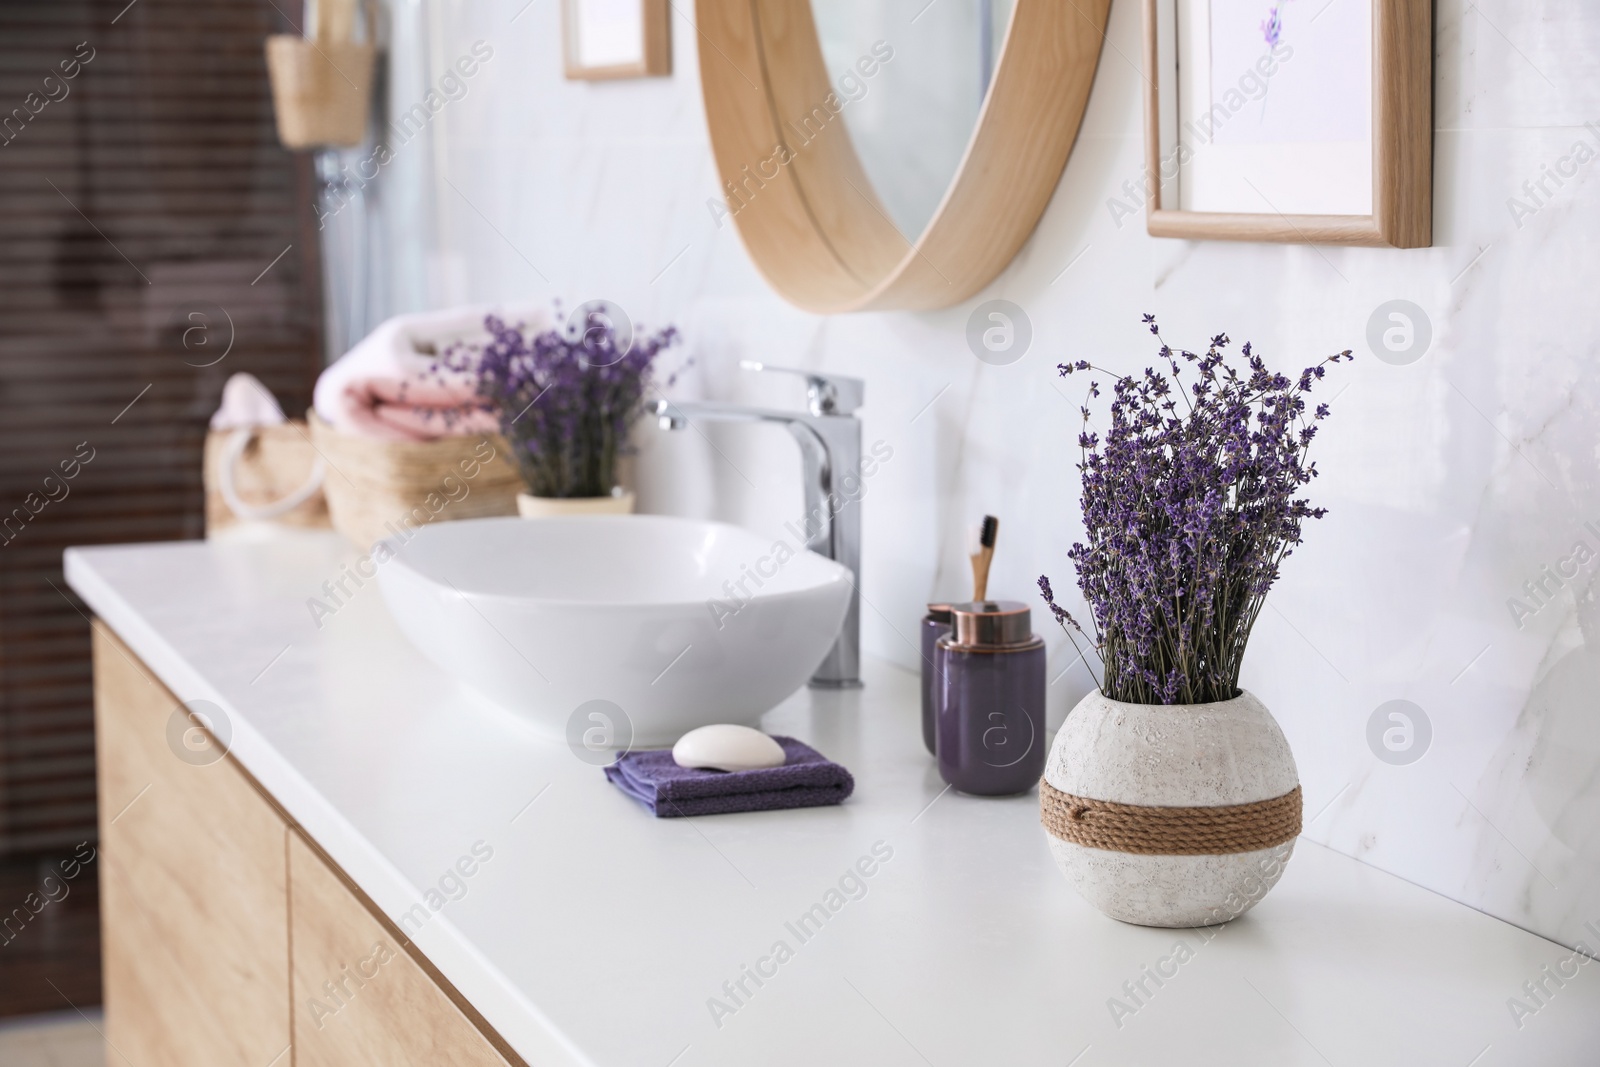 Photo of Vase with dried lavender flowers on bathroom counter. Interior design